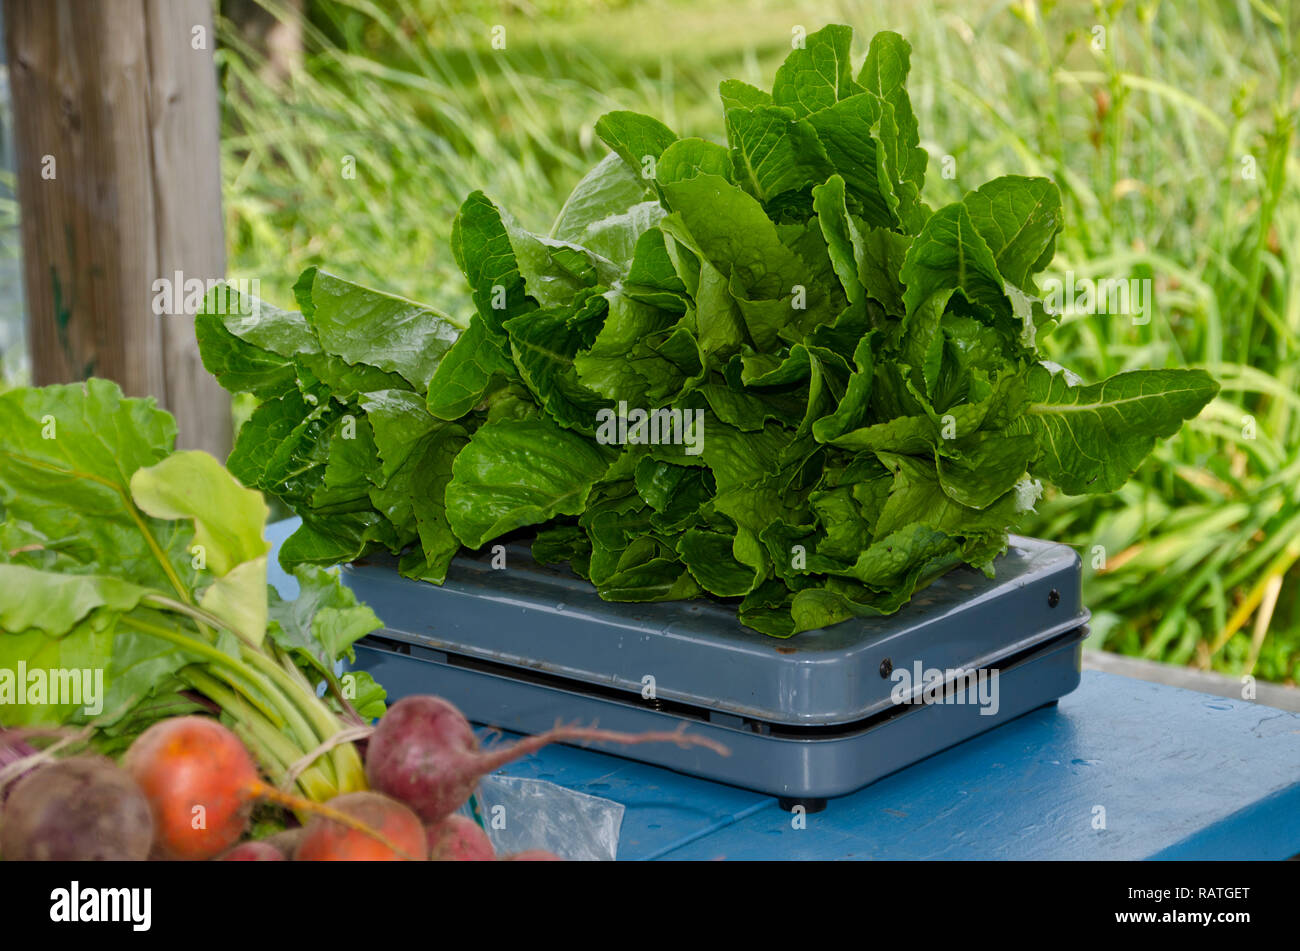 Community supported agriculture: Weighing vegetables in the community garden, Yarmouth Maine Stock Photo